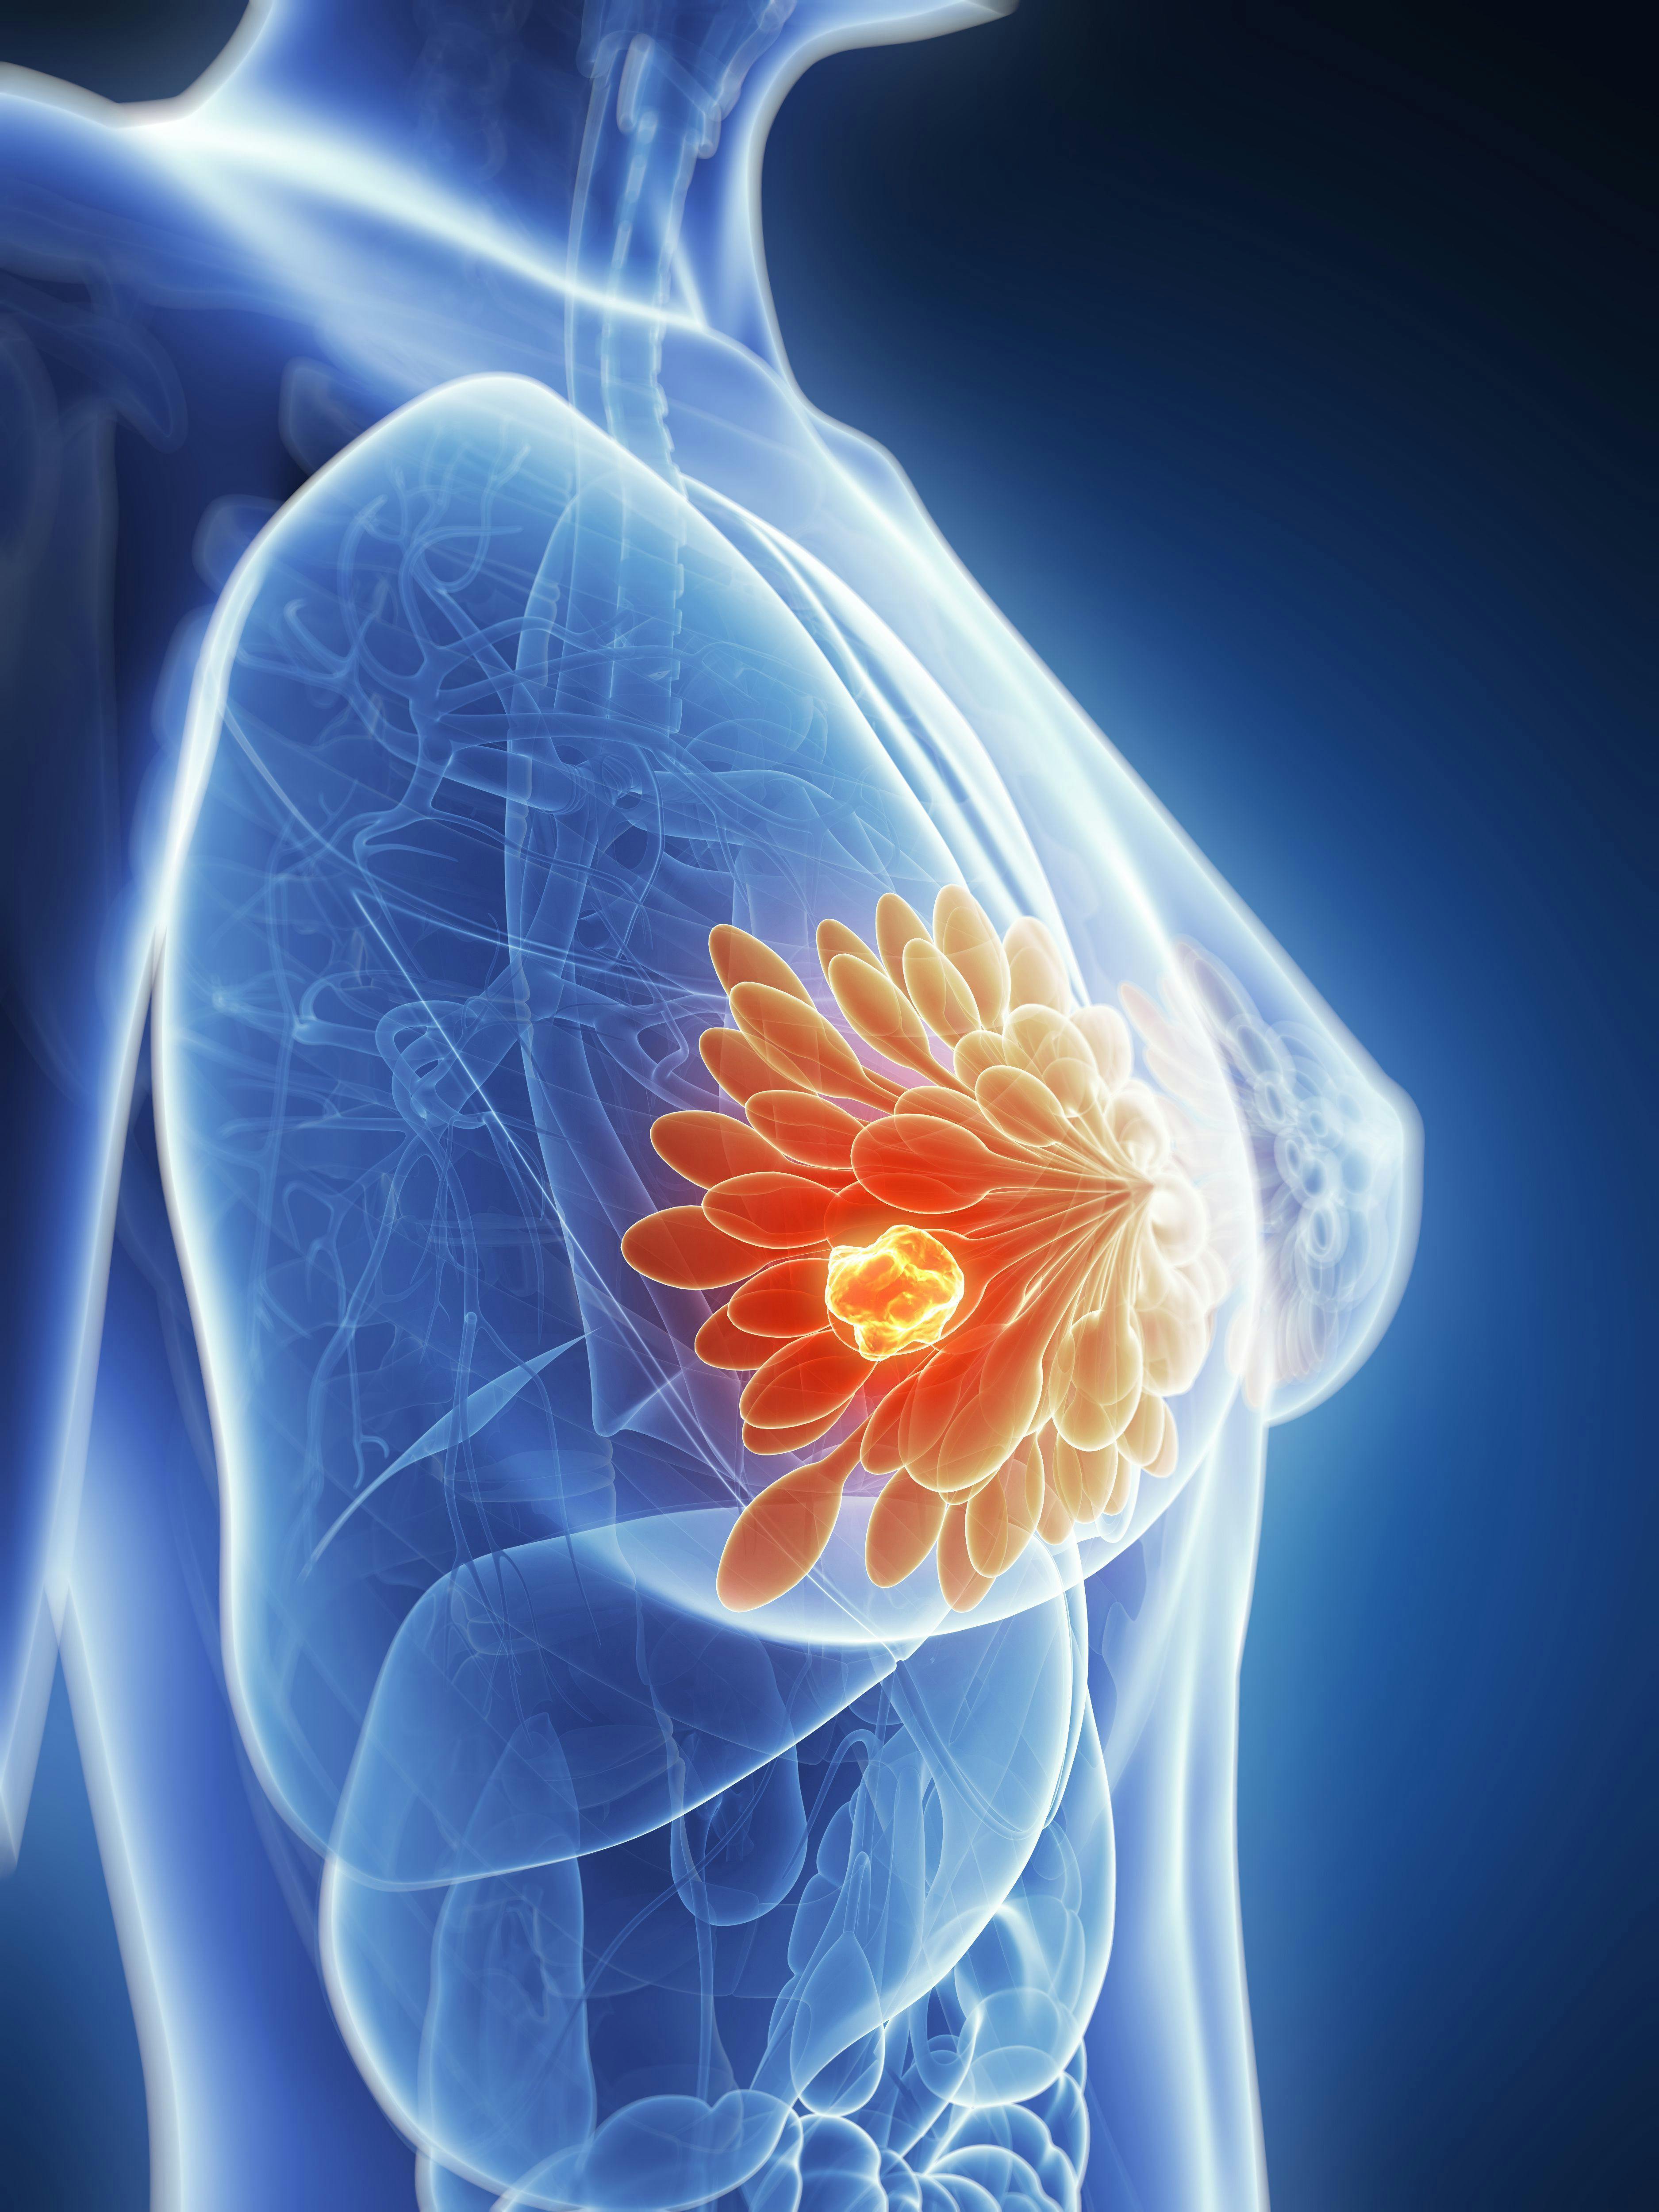 The guidelines recommend that, for patients with early-stage, node-negative invasive breast cancer with favorable clinical features and tumor characteristics, PBI is the recommended treatment option over WBI.